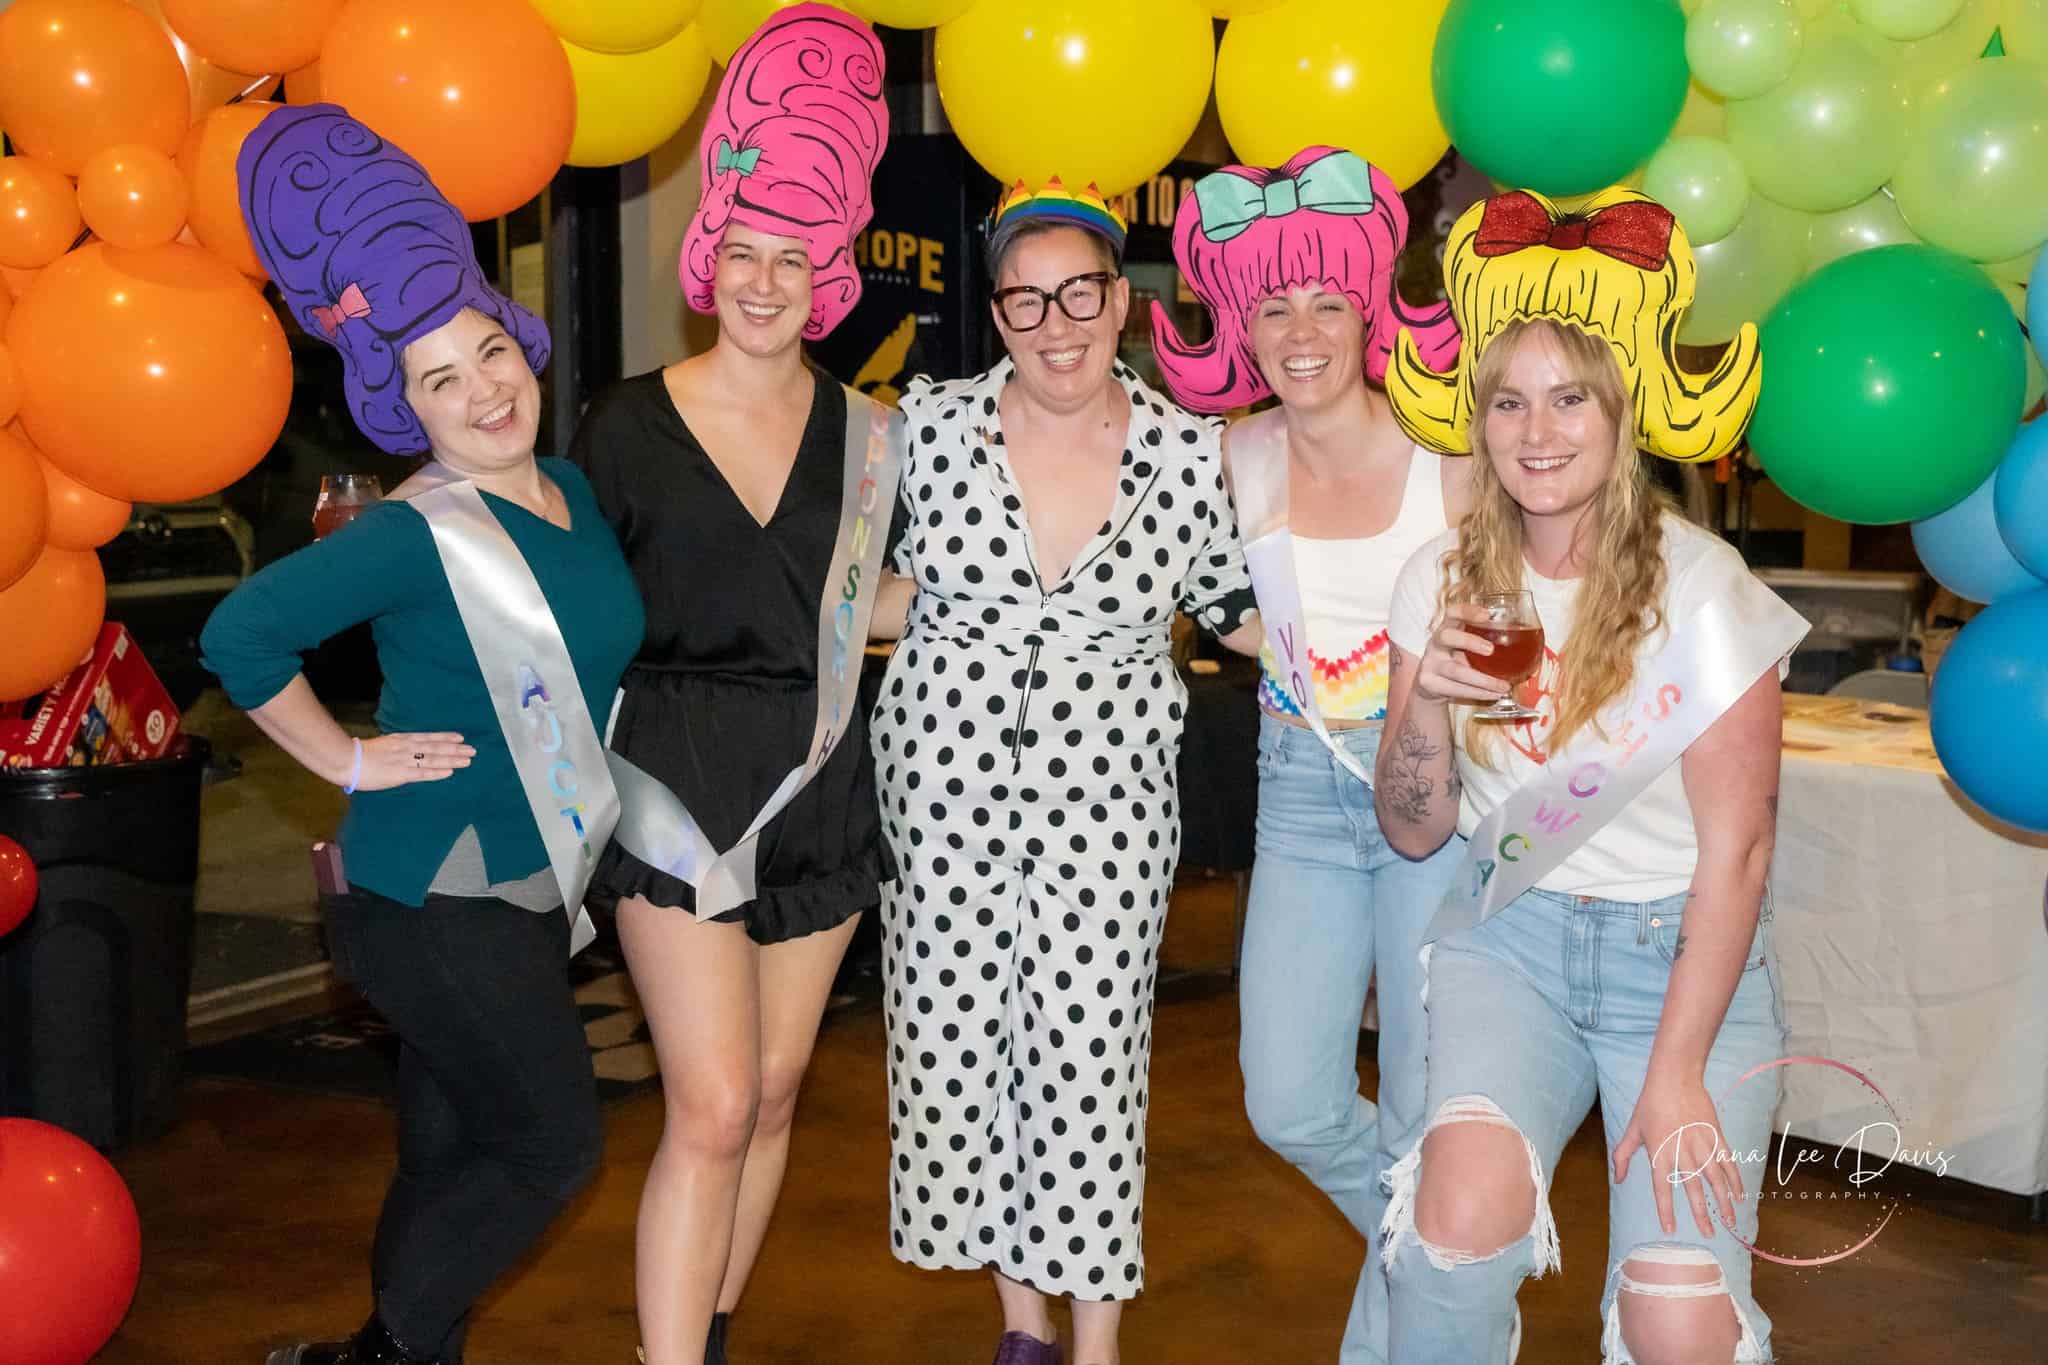 Group of smiling people at a party wearing colorful whimsical wigs and party attire, with balloons in the background.